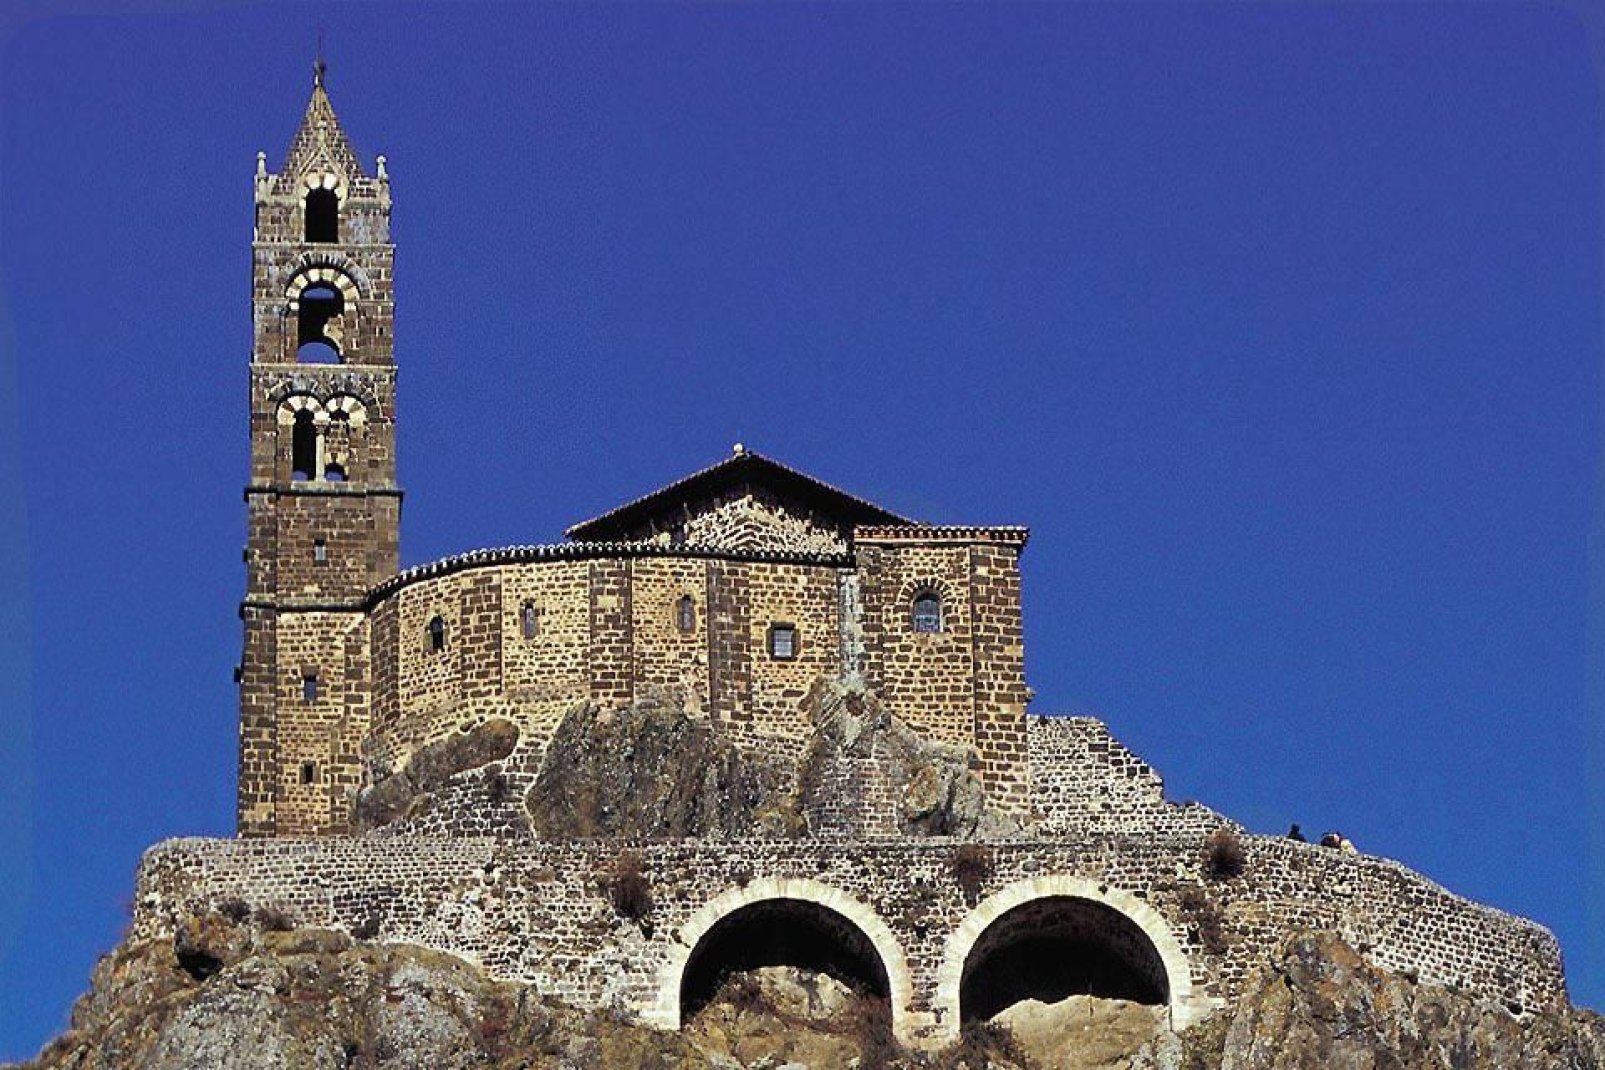 Perched on a volcanic rock, this Roman chapel is a not to be missed site when visiting the town.